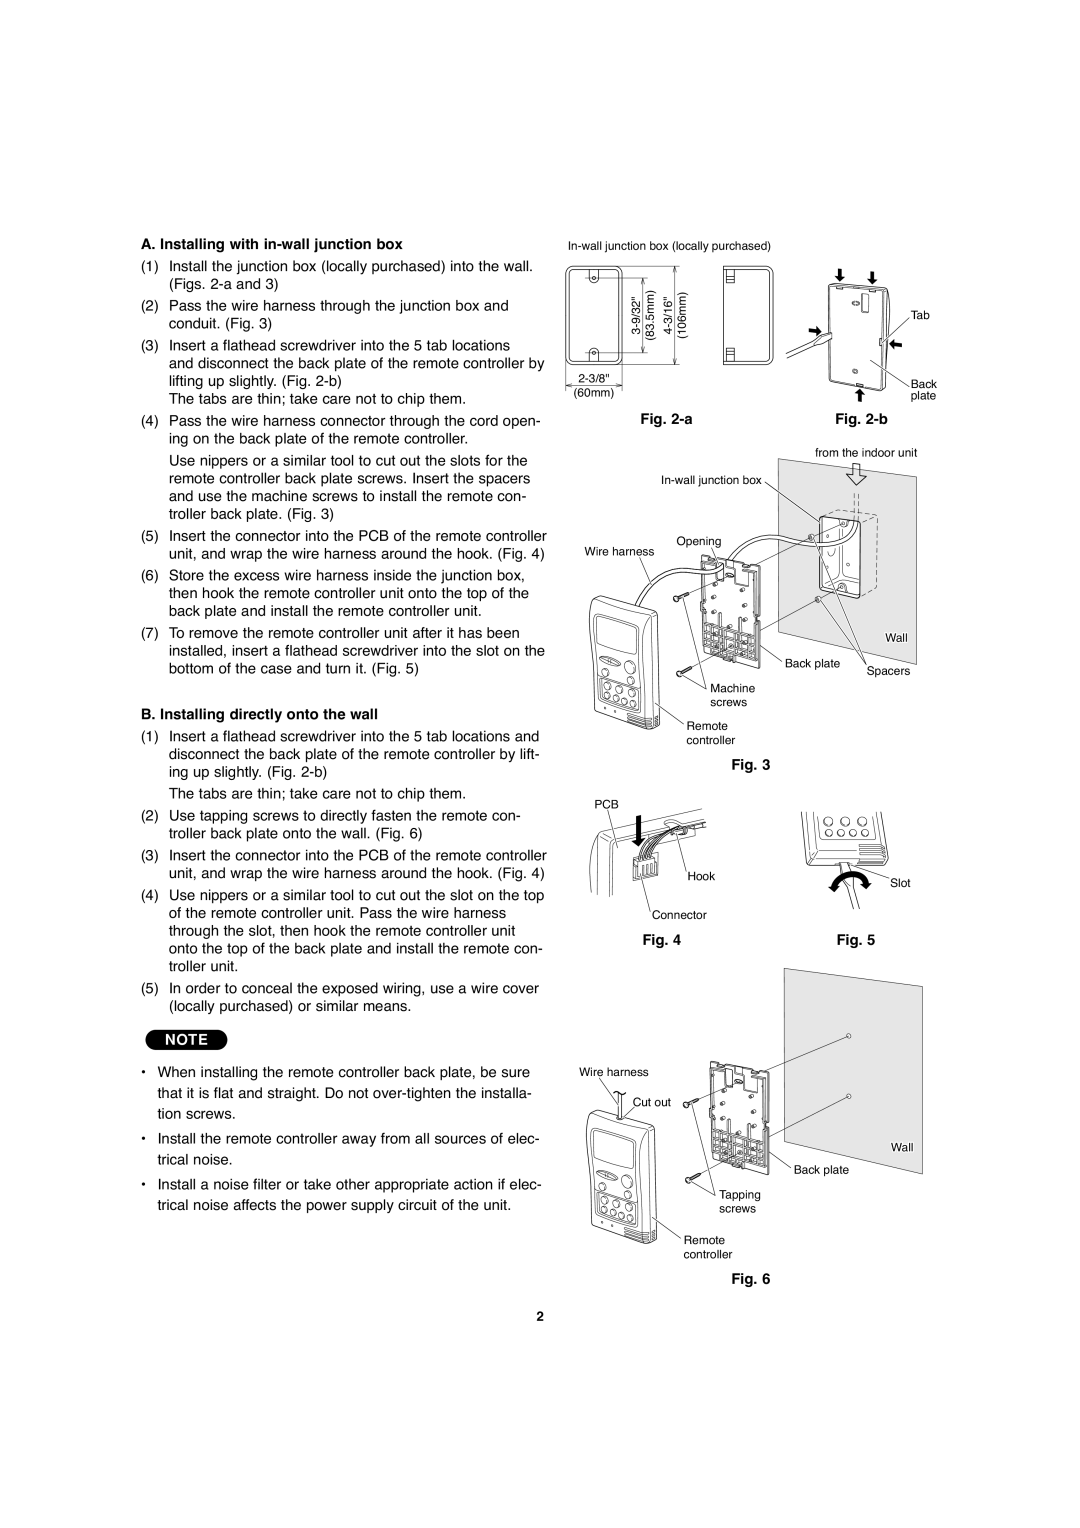 Sanyo XMHS0972, XMHS1272 service manual A. Installing with in-walljunction box, B. Installing directly onto the wall, Fig 